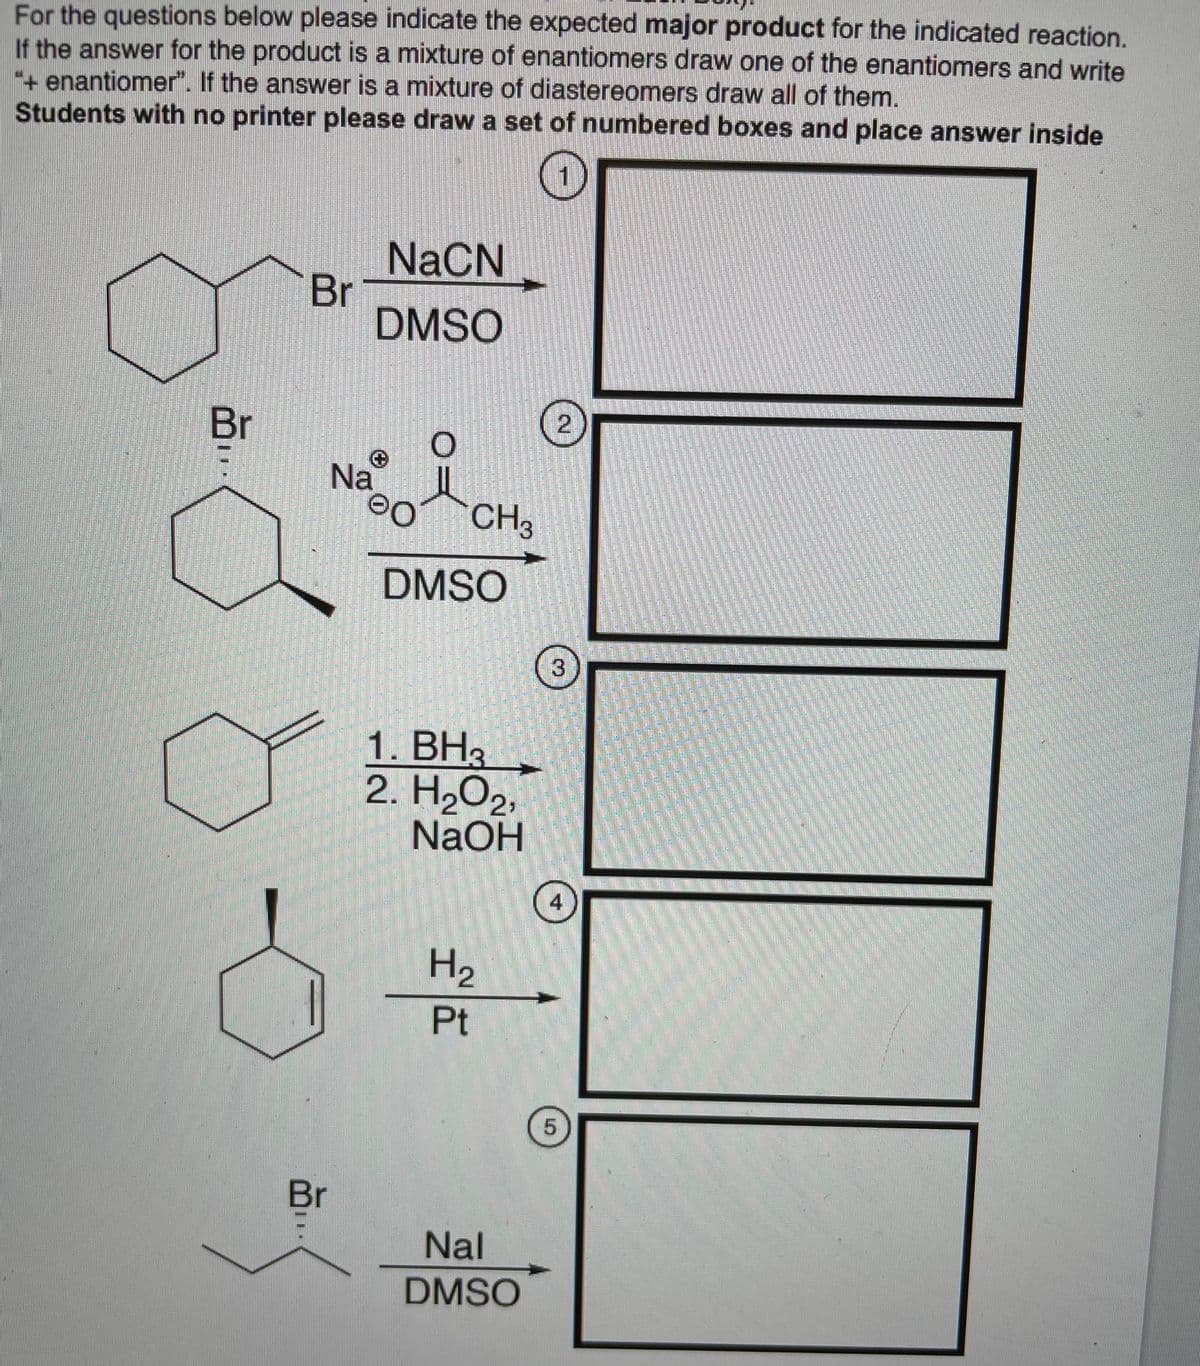 For the questions below please indicate the expected major product for the indicated reaction.
If the answer for the product is a mixture of enantiomers draw one of the enantiomers and write
+ enantiomer". If the answer is a mixture of diastereomers draw all of them.
Students with no printer please draw a set of numbered boxes and place answer inside
NACN
Br
DMSO
Br
Na
0OCH3
DMSO
3
1. BH3
2. H2O2,
NaOH
4
H2
Pt
Br
Nal
DMSO
